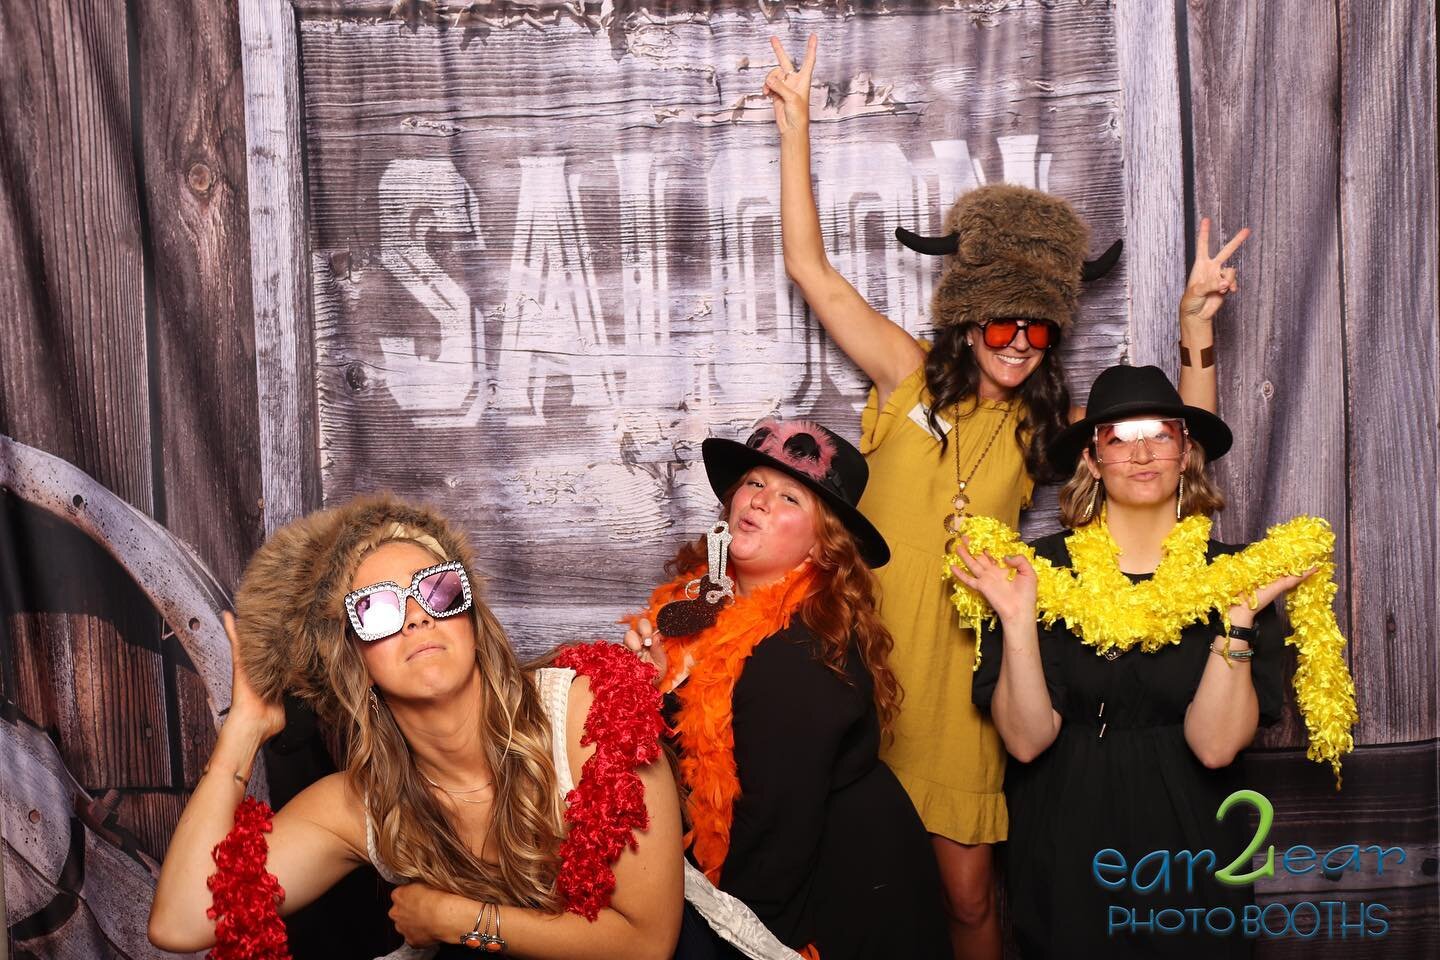 Just thinking back to that awesome evening with the @grand.foundation for the Grand Gala&hellip;.. So much fun! Love this community!! @ear2earphotobooths @visitgranbyco #grandcountycolorado #grandcountyevents #smile #photooftheday #photobooth